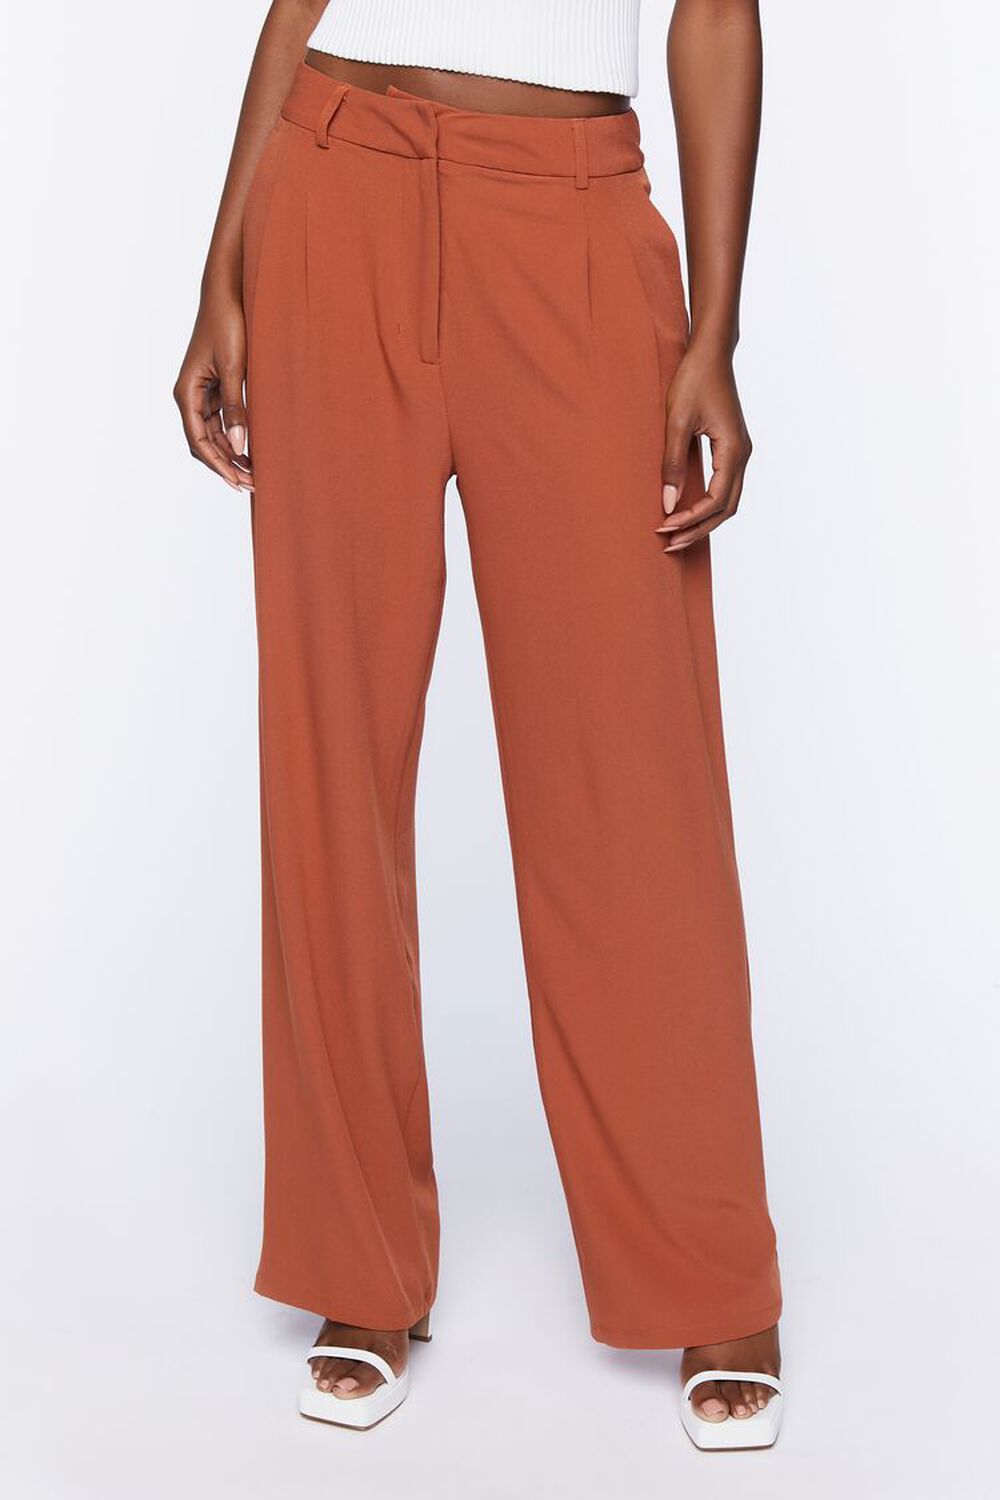 GINGER Relaxed High-Rise Crepe Pants, image 2